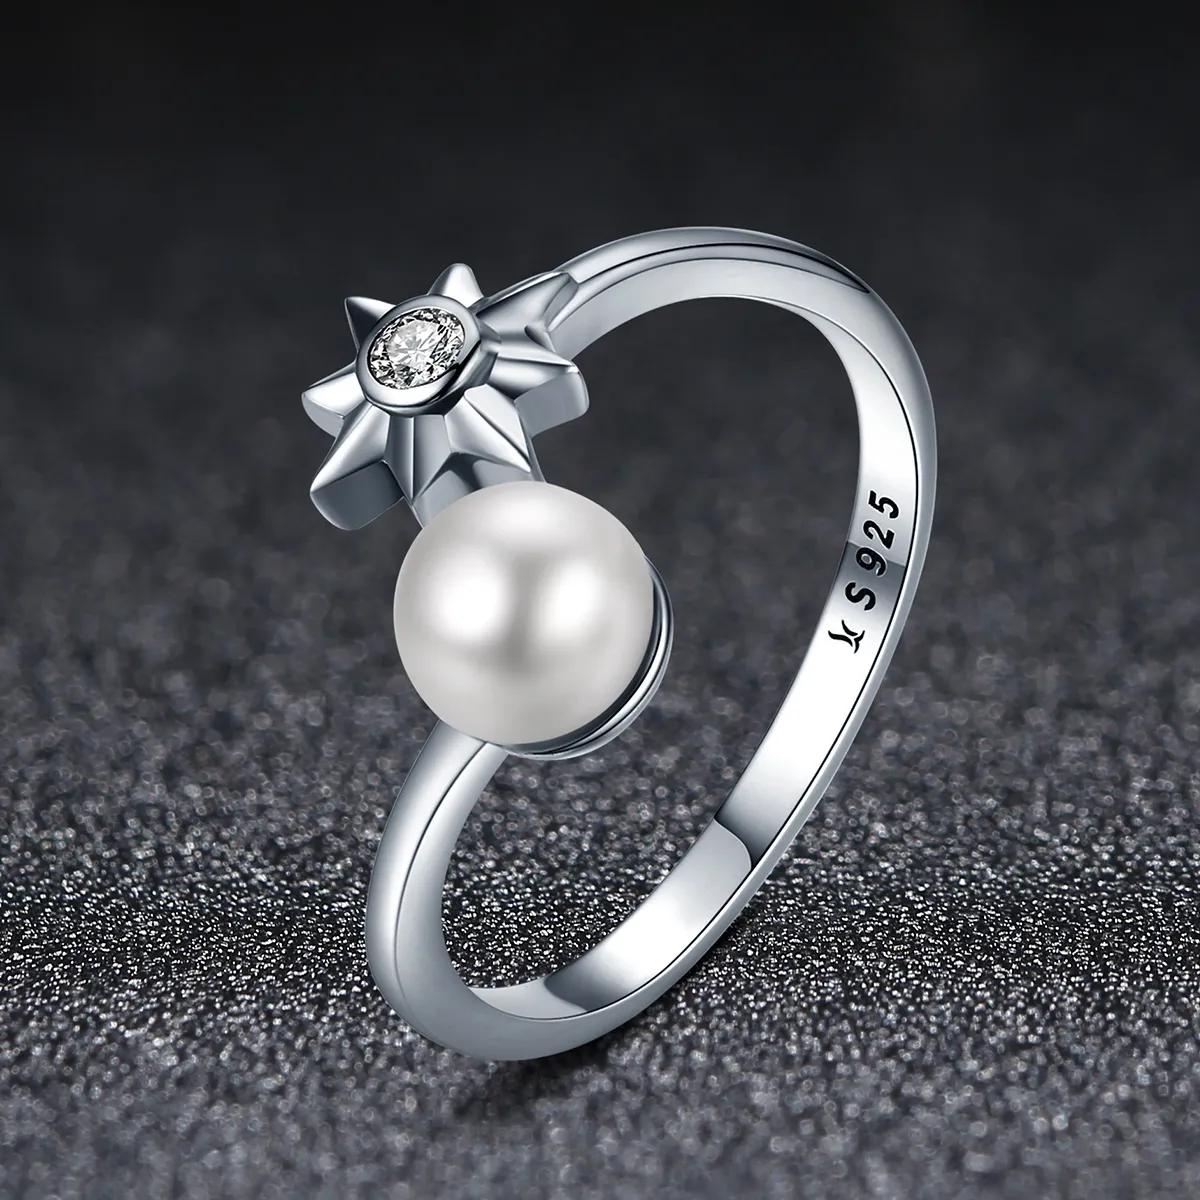 Pandora Style Blooming Moment Open Ring - VSR099